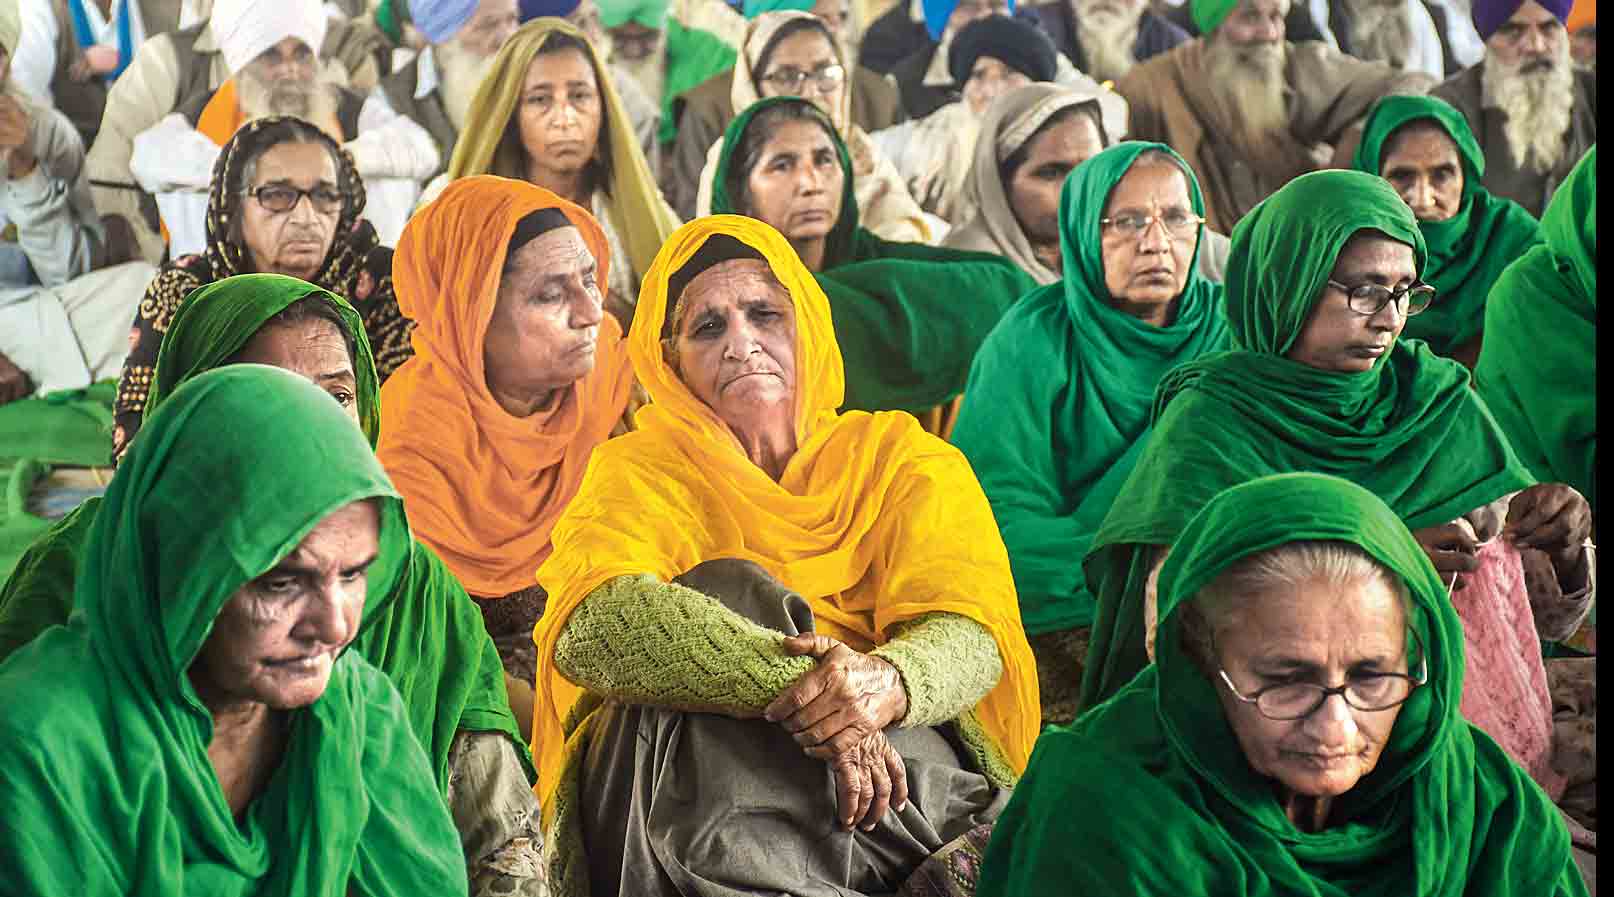 Farmers listen to a speaker at the Singhu border protest site on Wednesday